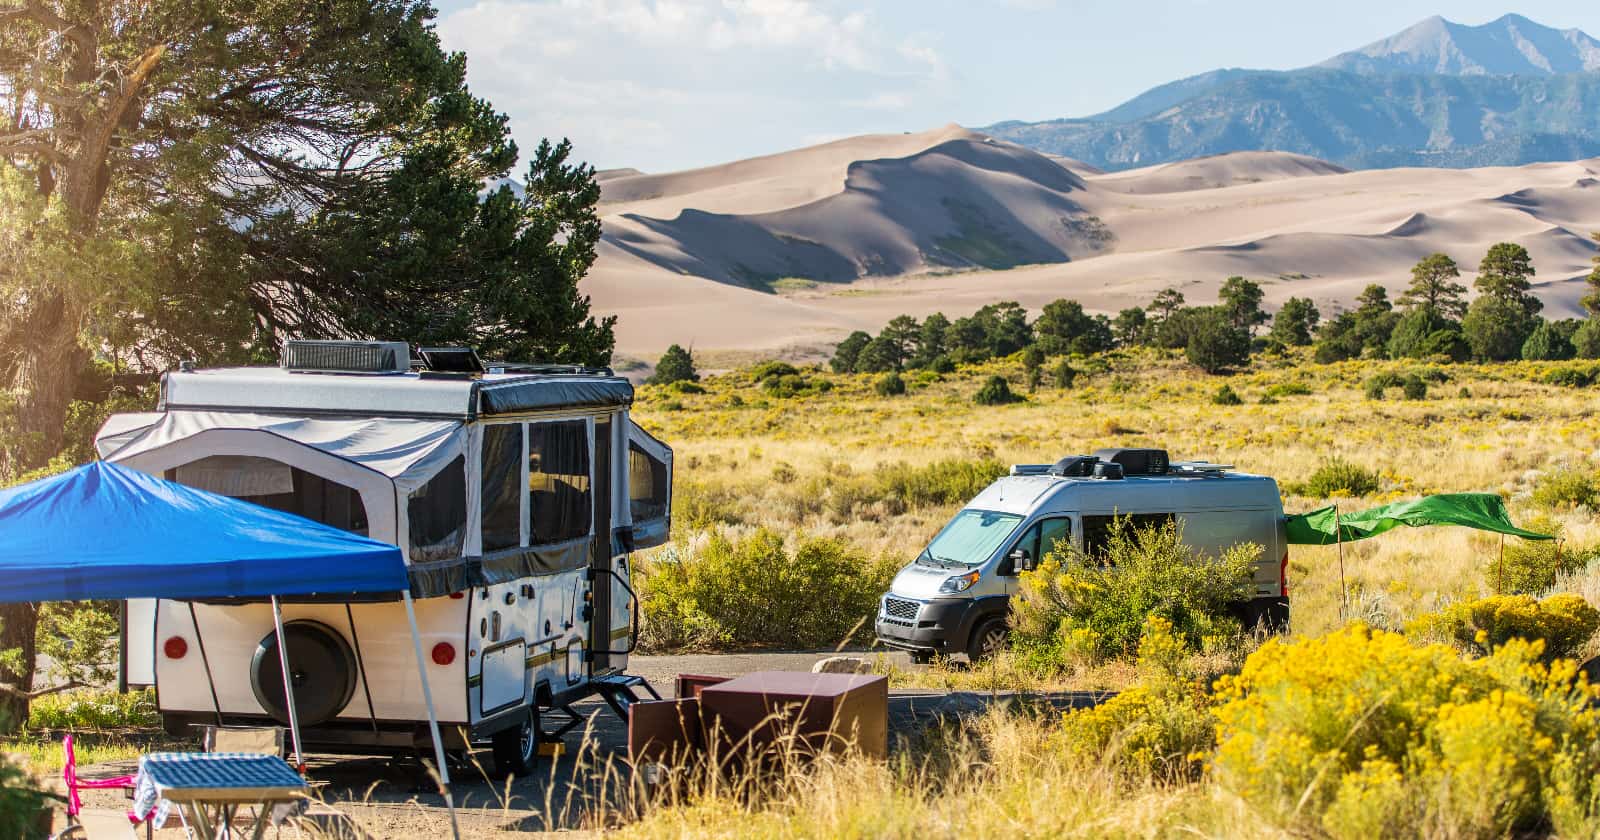 Pop up tent and campervan each setup in their individual campsites with Colorado Sand Dune National Park as the backdrop